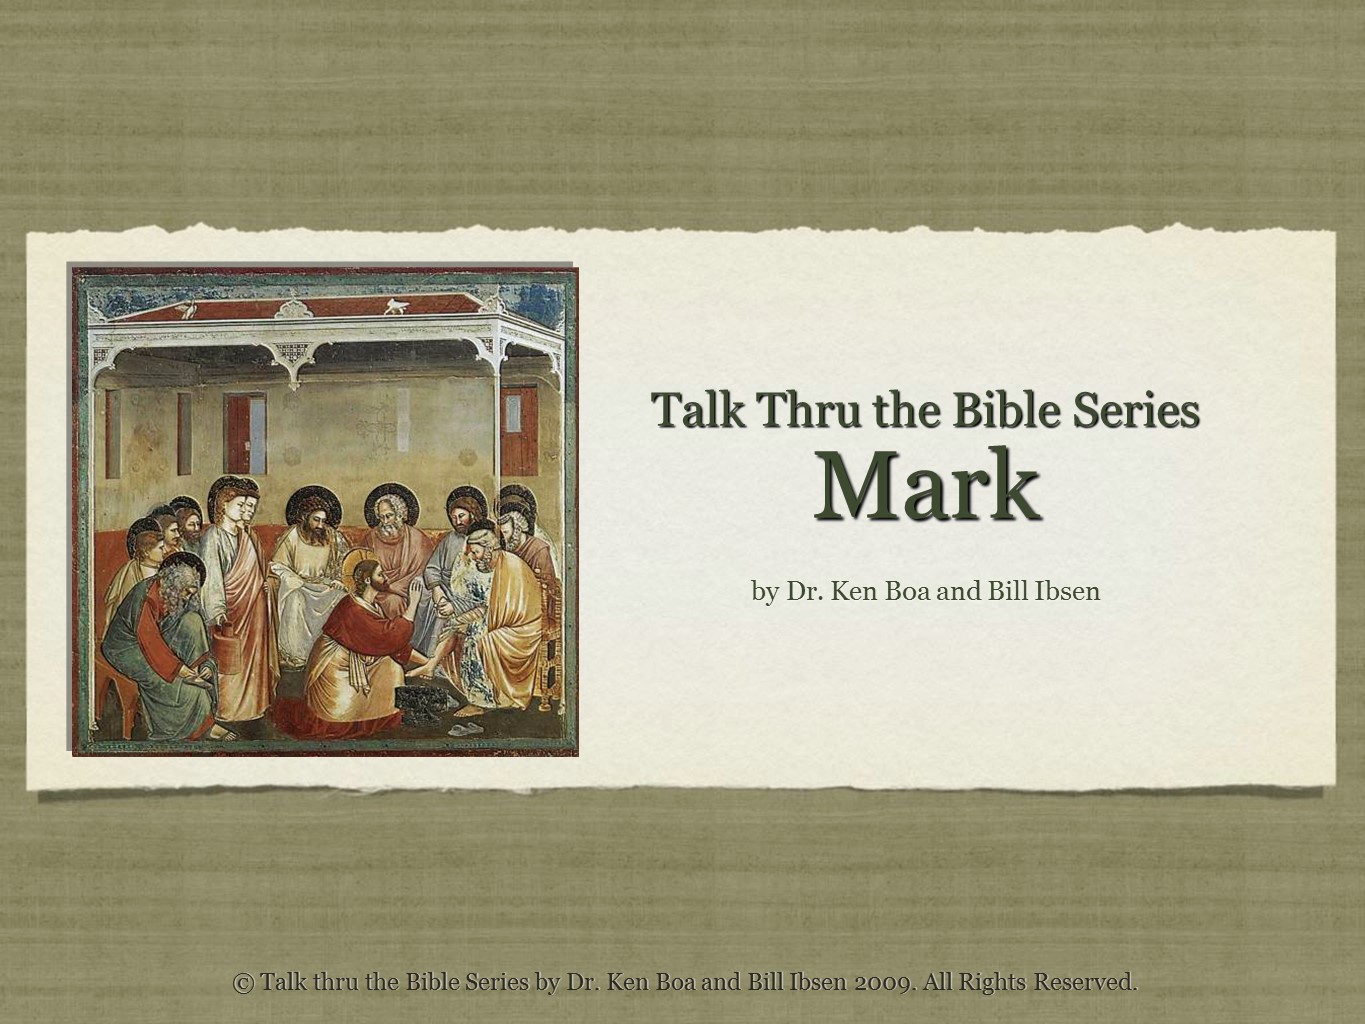 Review of the Gospel of Mark